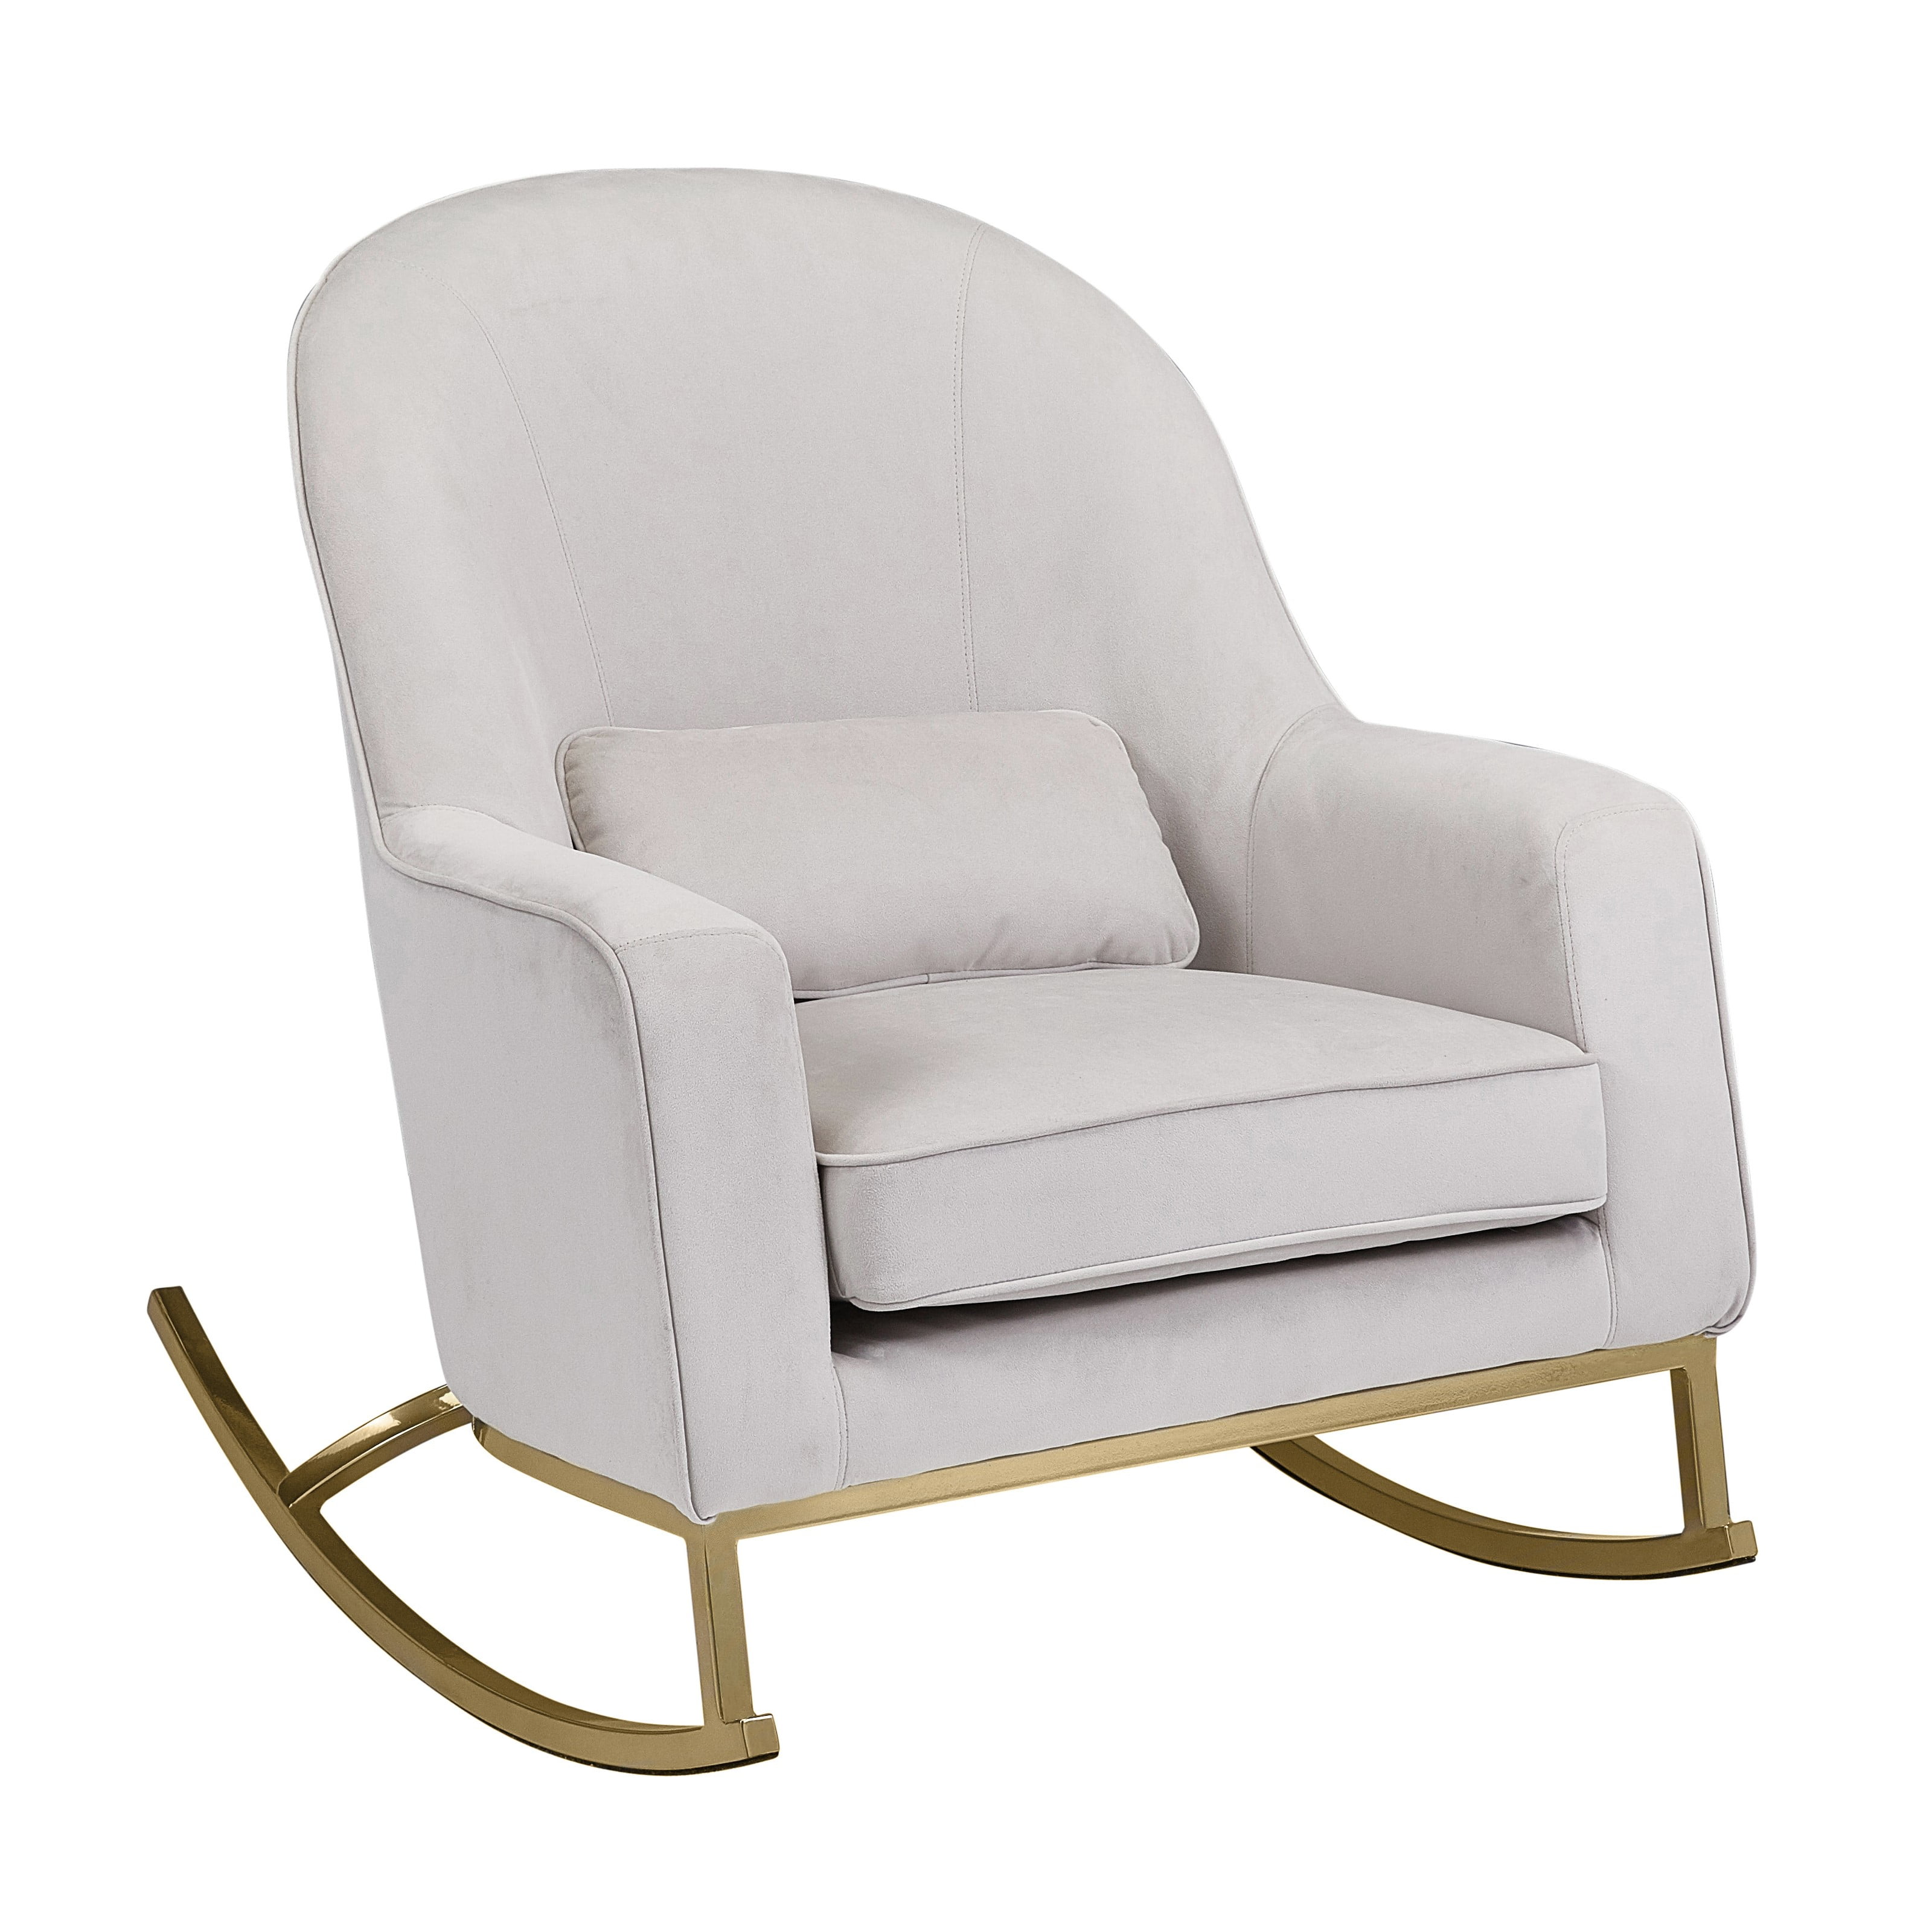 rocking chair bassinet combo